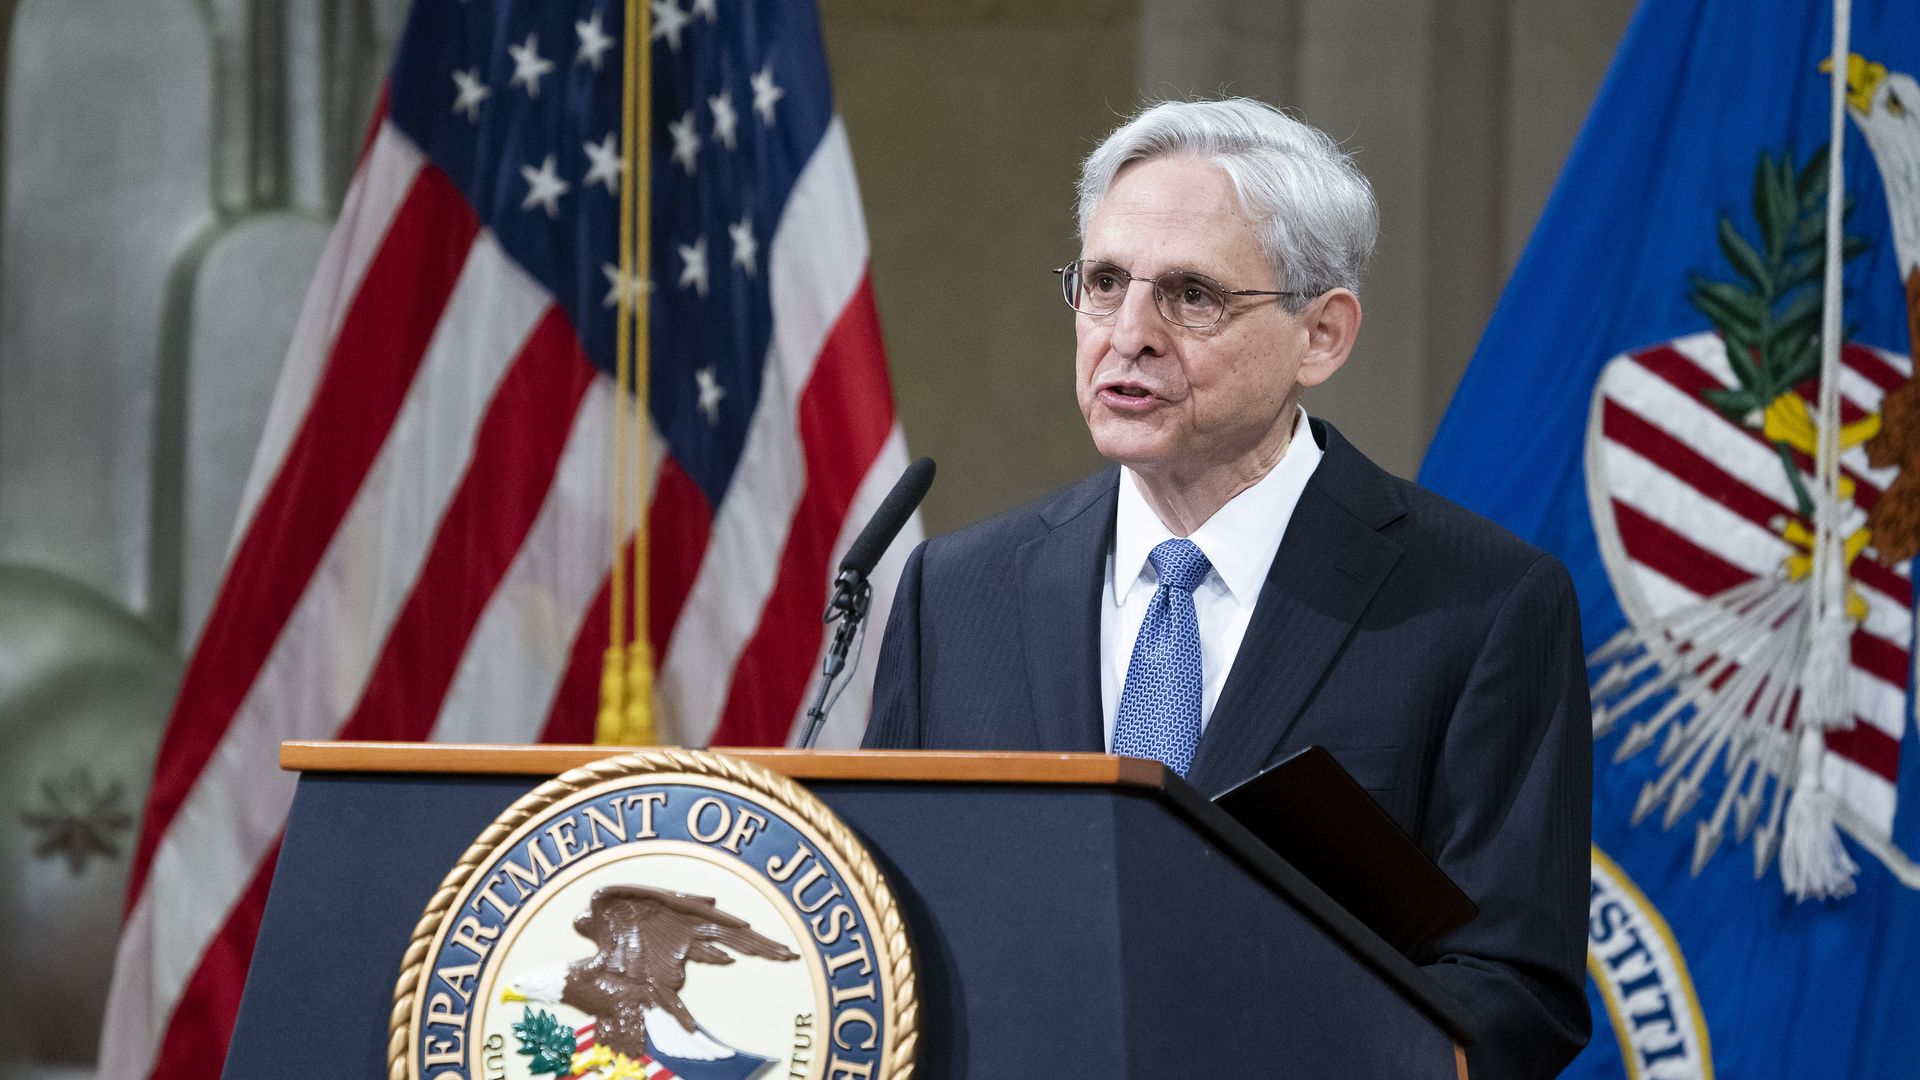 Photo of Merrick Garland speaking from behind a podium